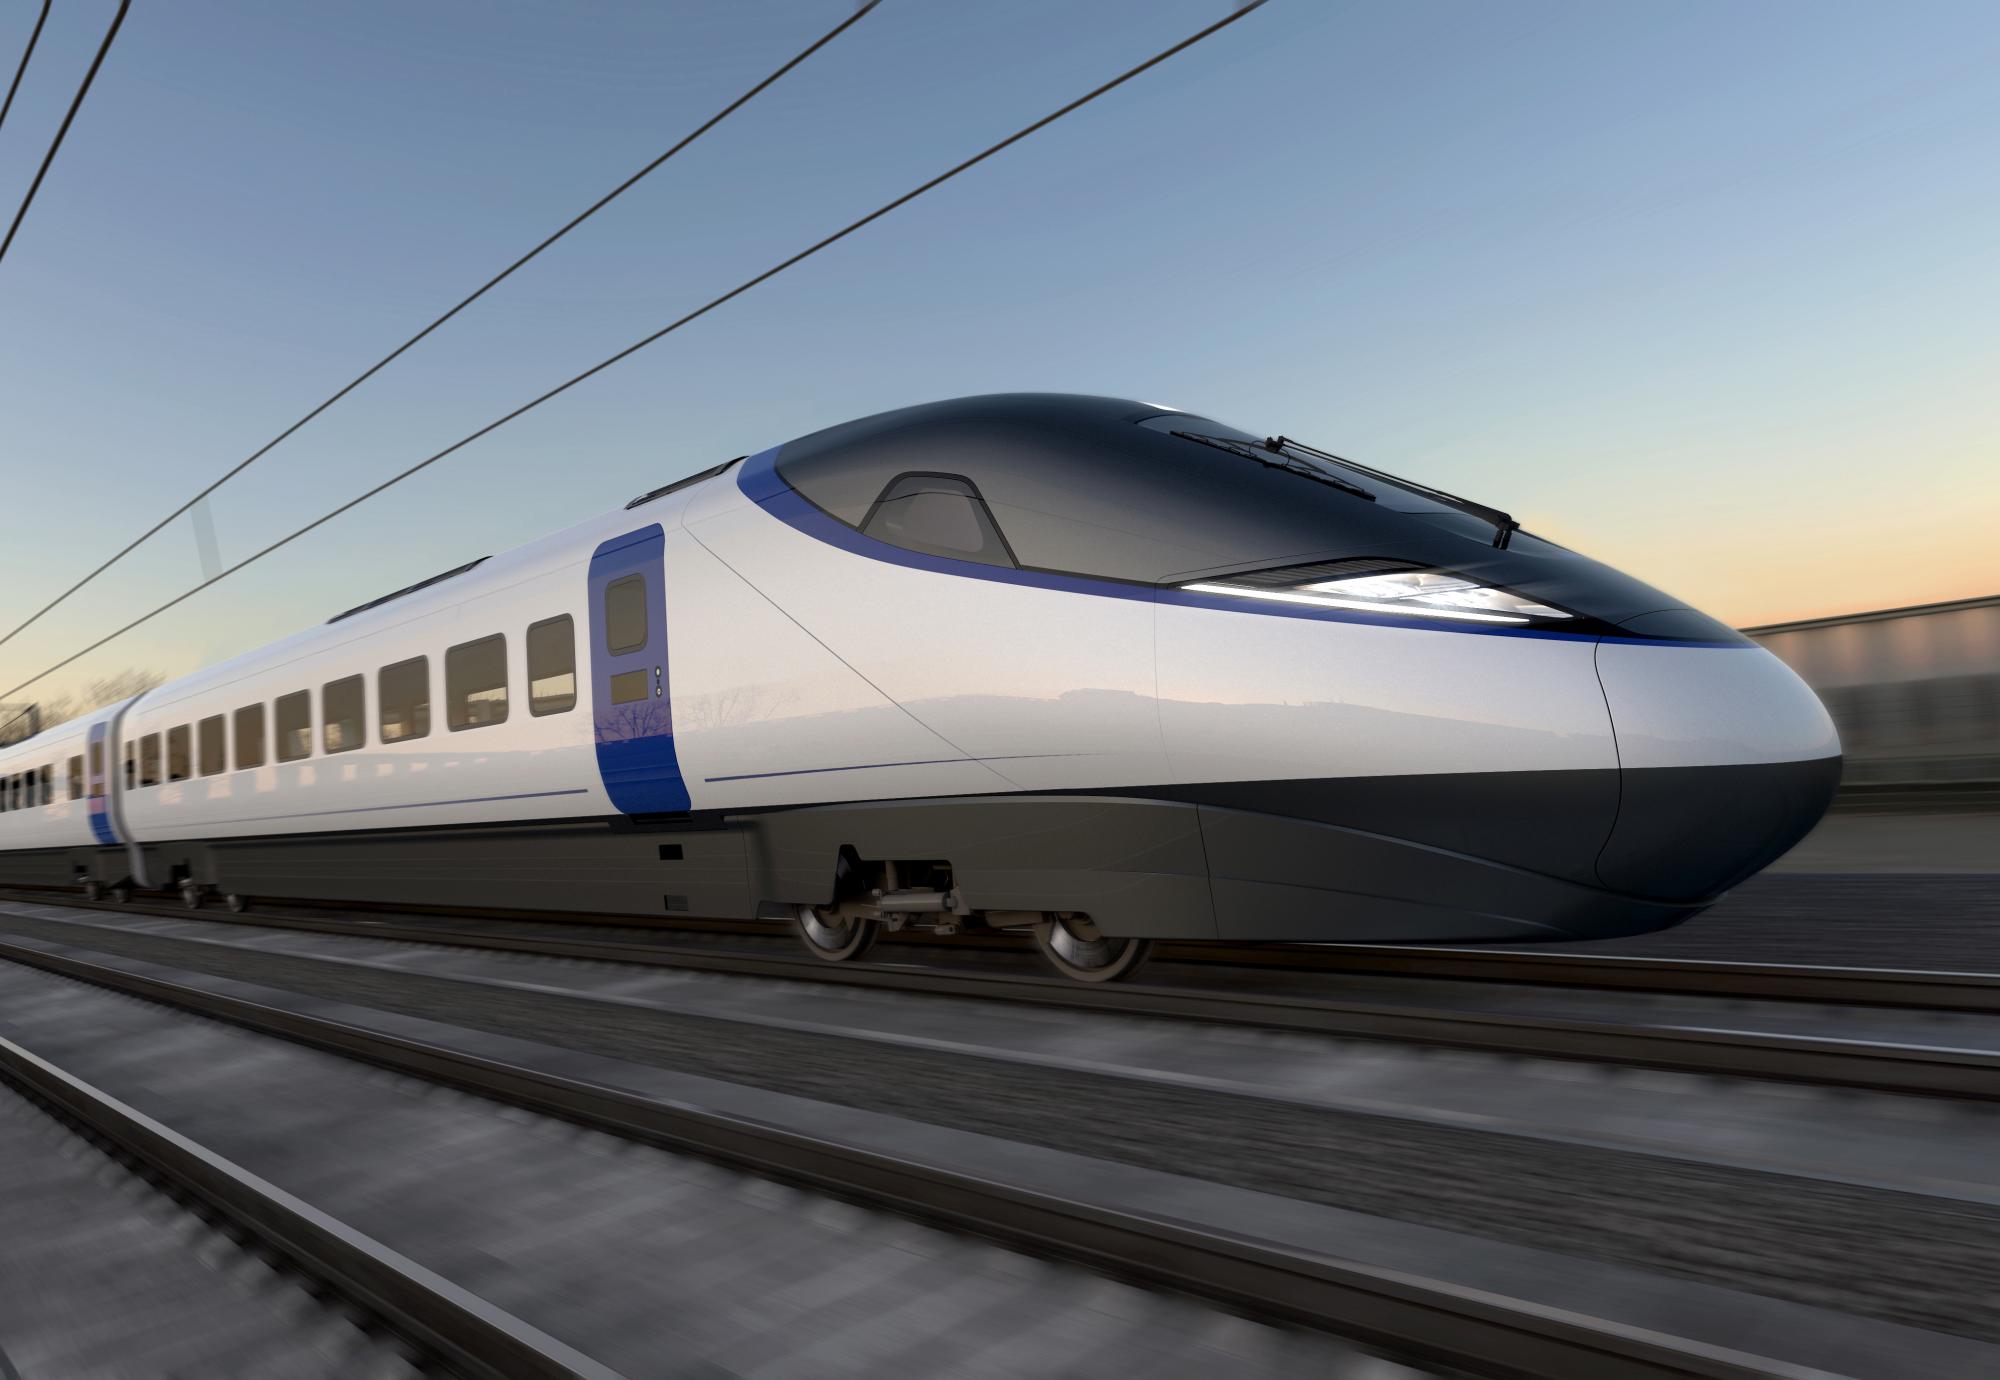 Artists impression of an HS2 train from the side, via HS2 